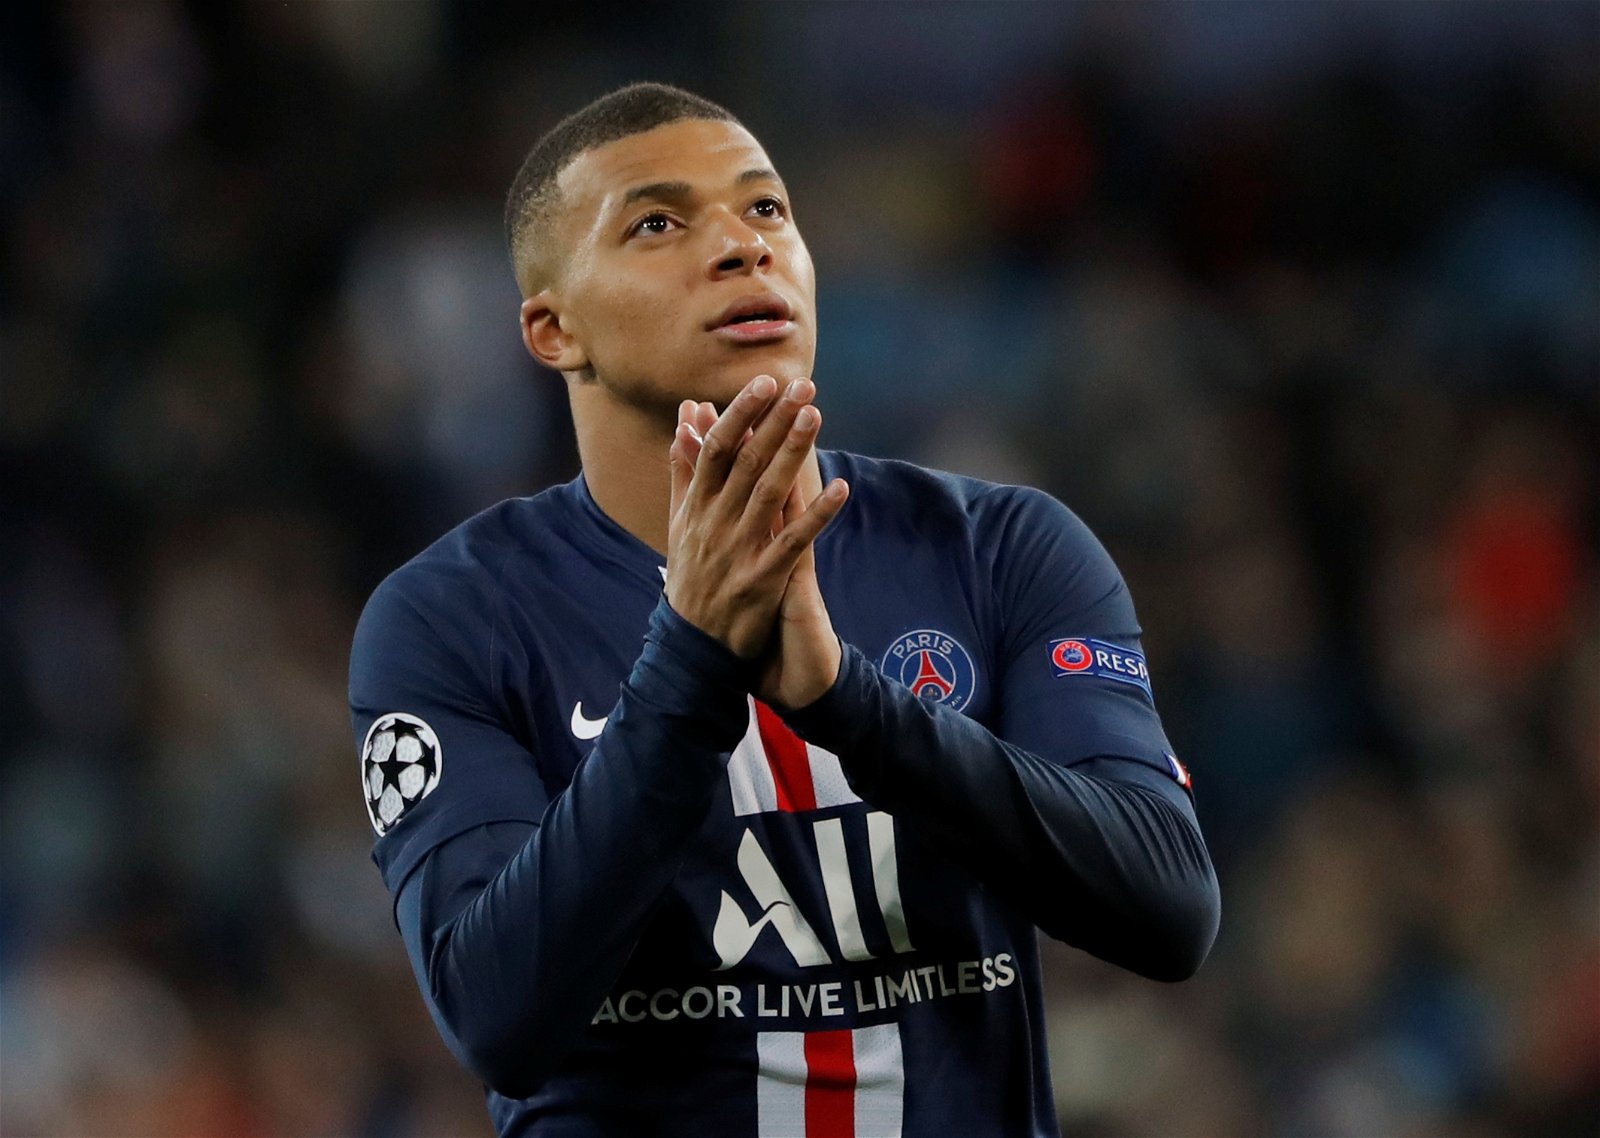 Mbappe's Ballon d'Or statements will leave you stunned